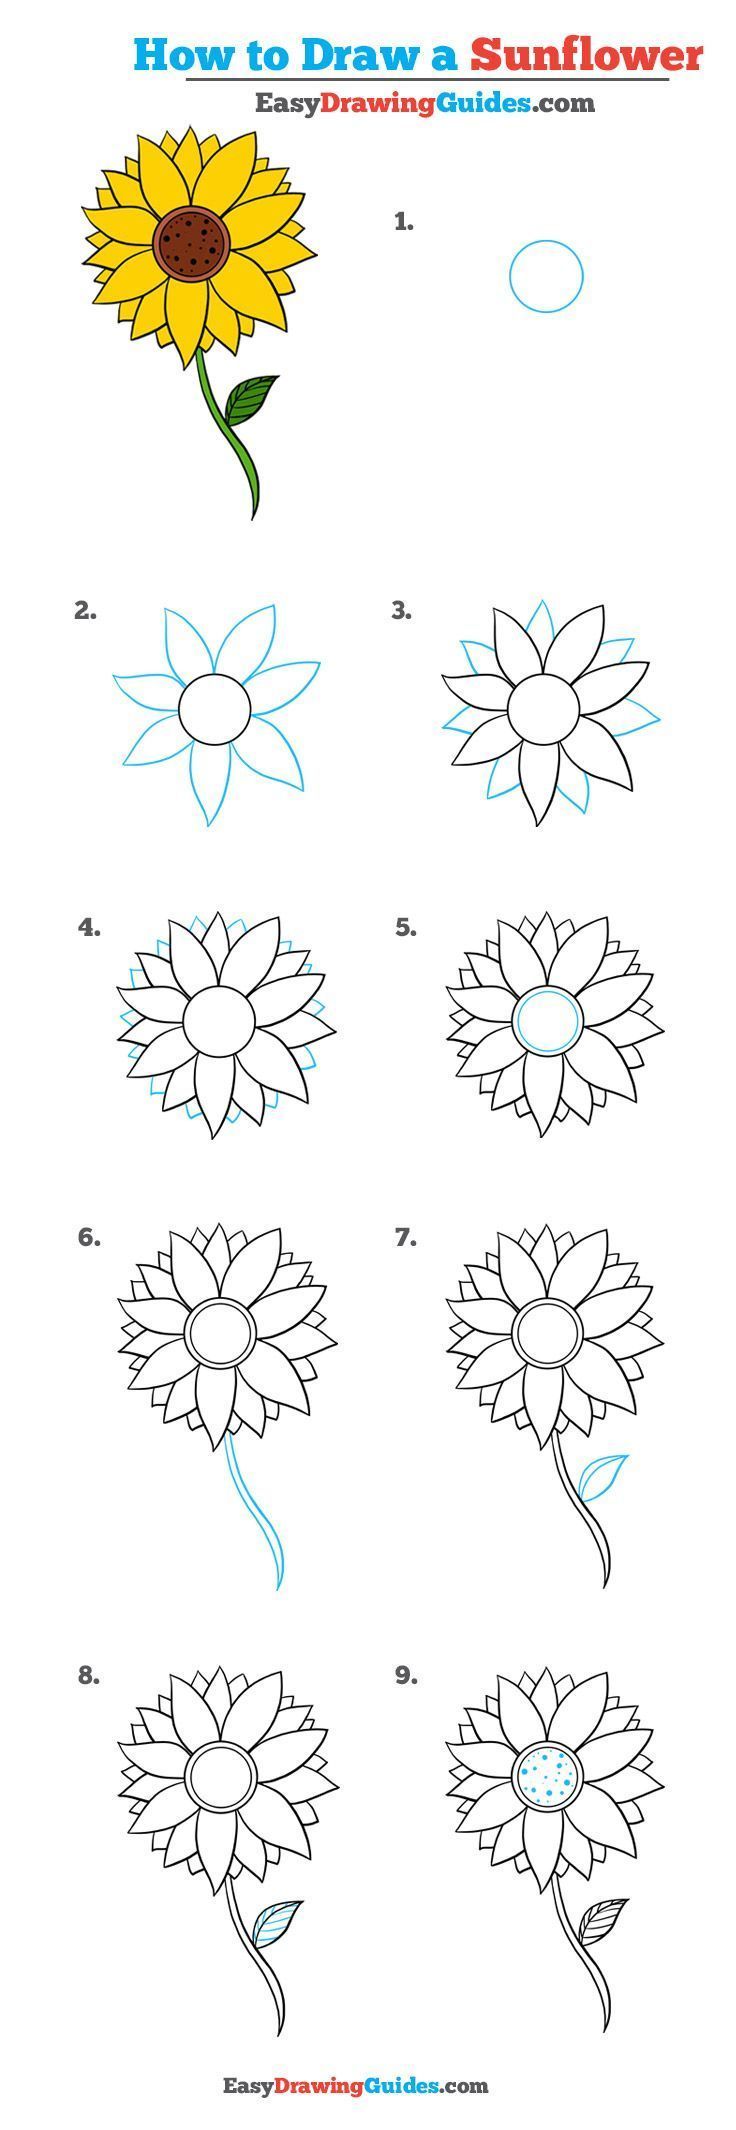 How To Draw A Tulip - Easy Step By Step Drawing Tutorial For